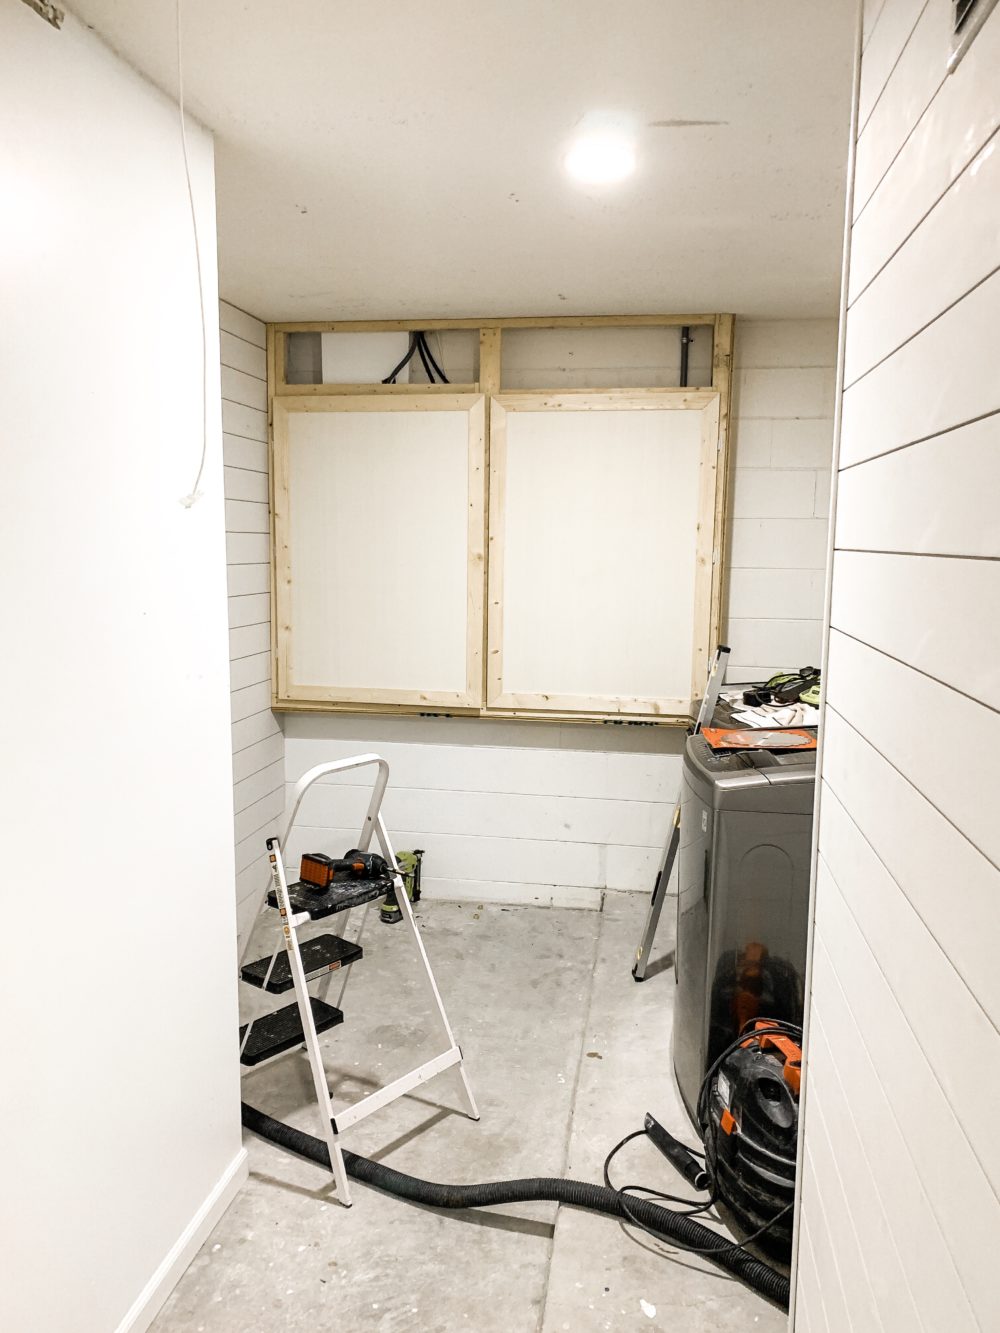 DIY for Covering Breaker Boxes: A Faux Cabinet Tutorial | How We Designed a Family Friendly Laundry Room in our Garage - The Reveal! by popular Florida DIY blog, Fresh Mommy: image of a family friendly laundry room.